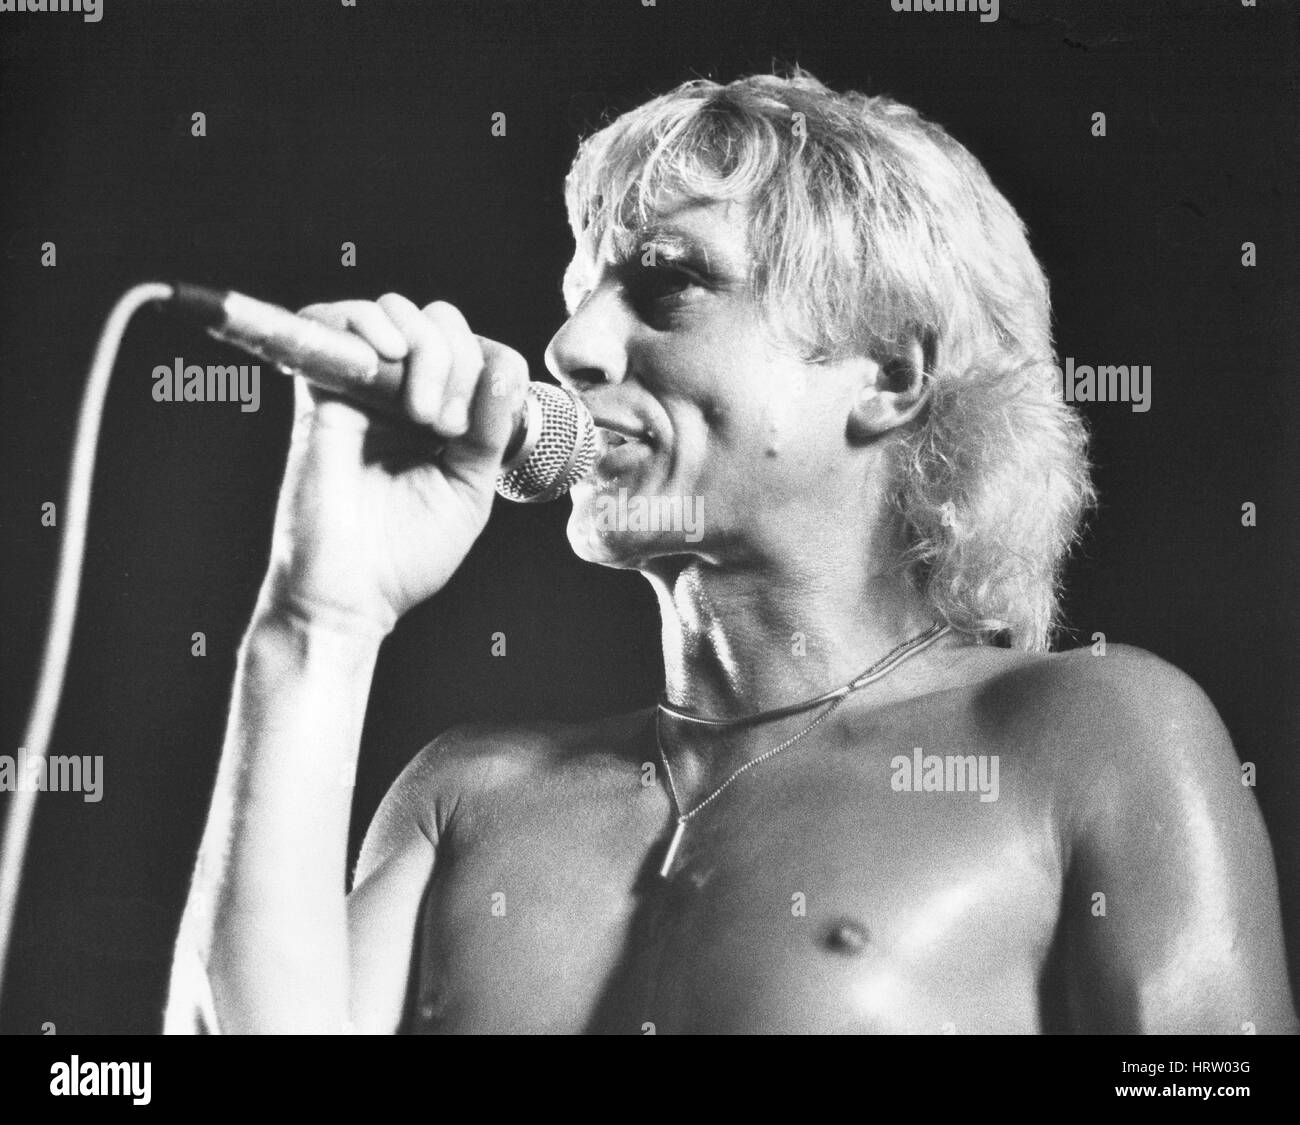 Andy Ellison, Lead singer of rock band Radio Stars, performa live on stage in London, England on July 21, 1978. He had previously been in the band Johns Children with Marc Bolan. Stock Photo